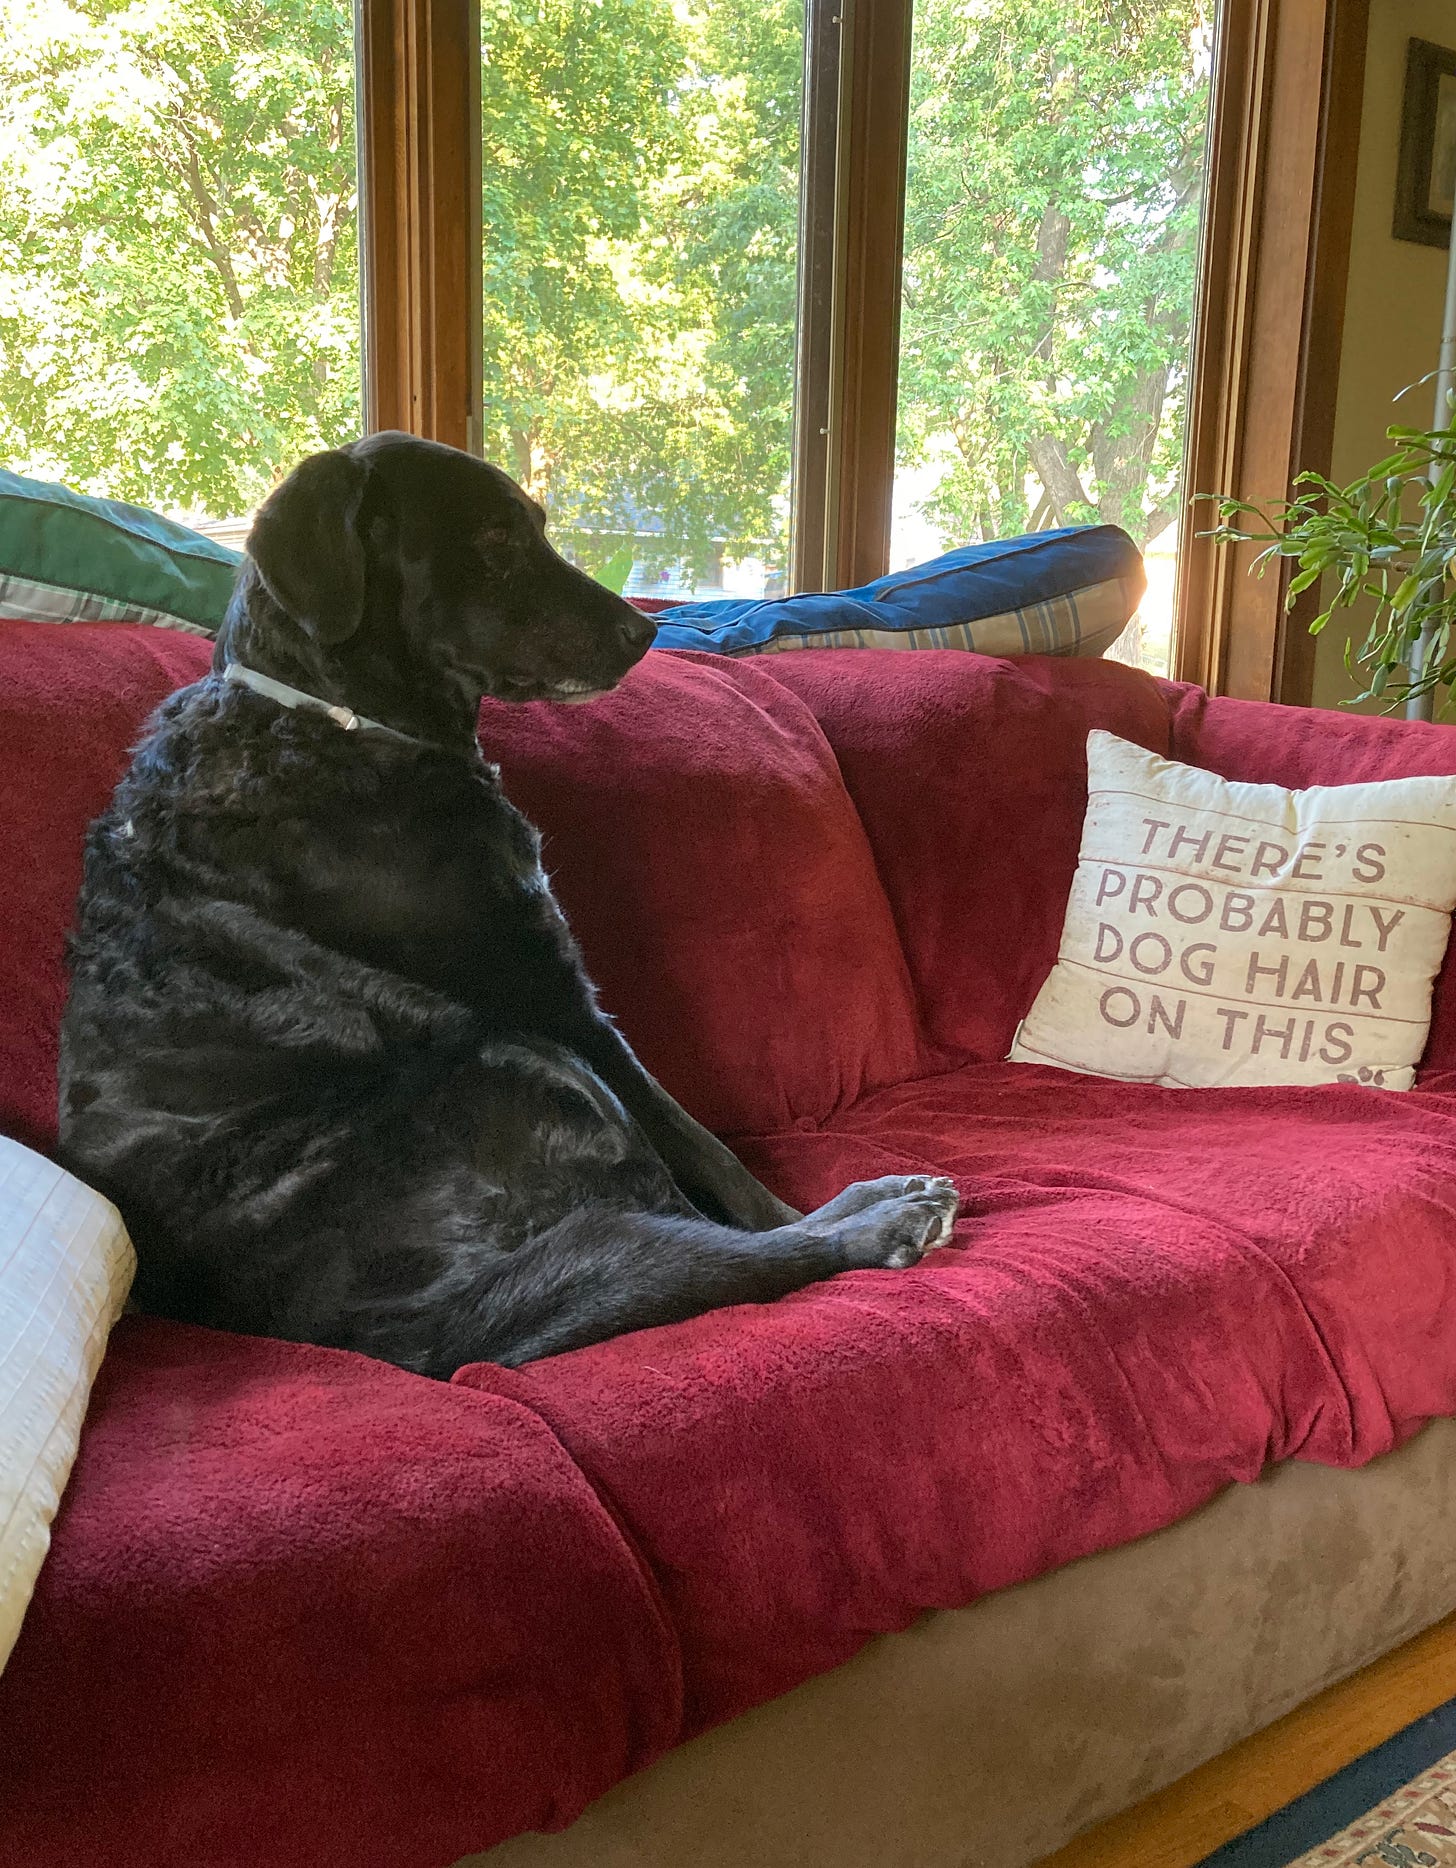 Black lab sitting almost like a human on a couch with a pillow that says, "There's probably dog hair on this" and a window showing green maple trees in background.